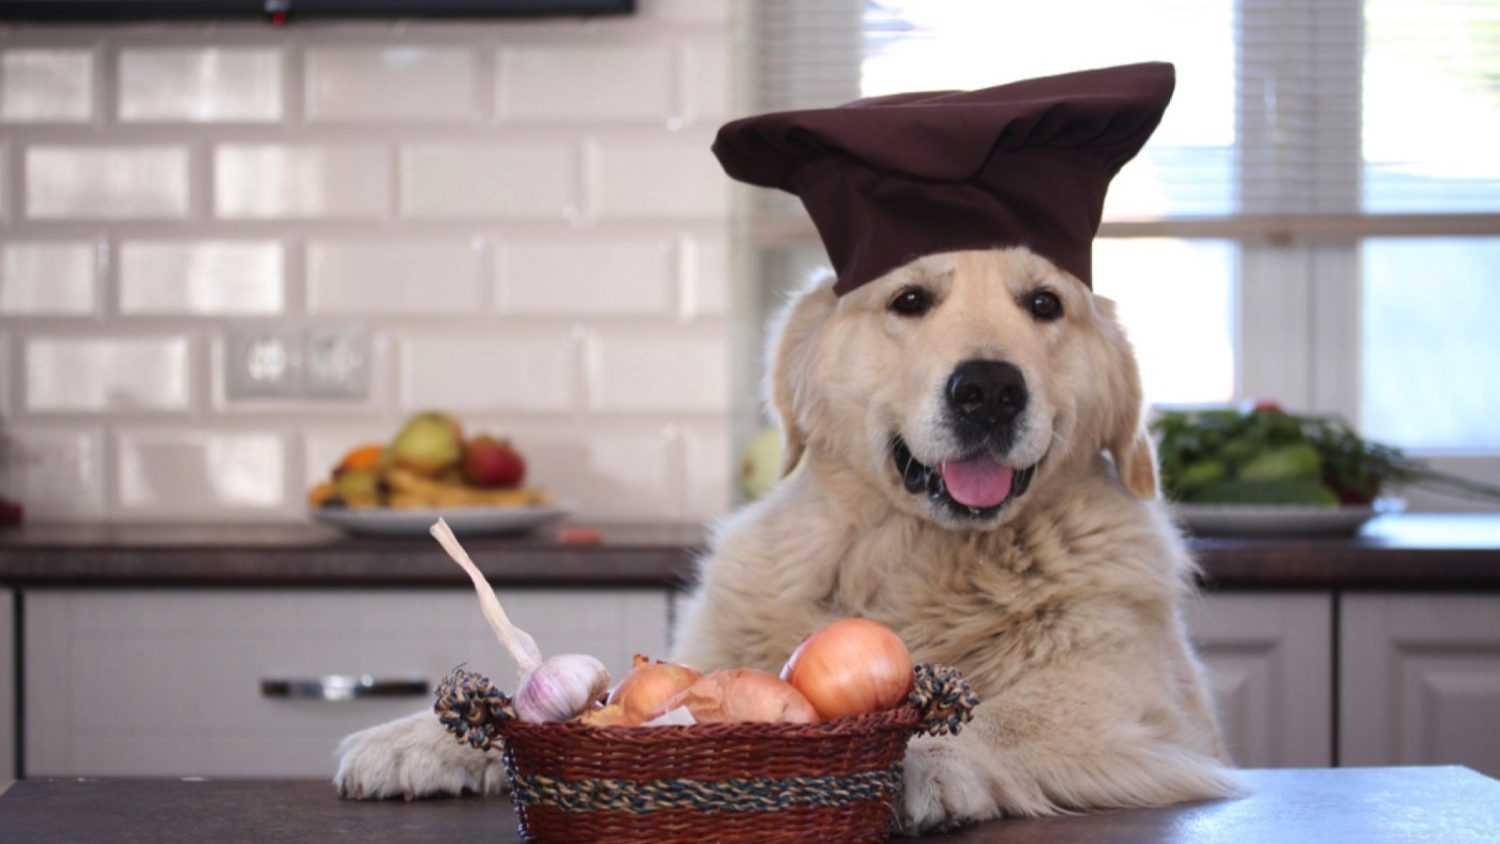 Cute dog infront of onion